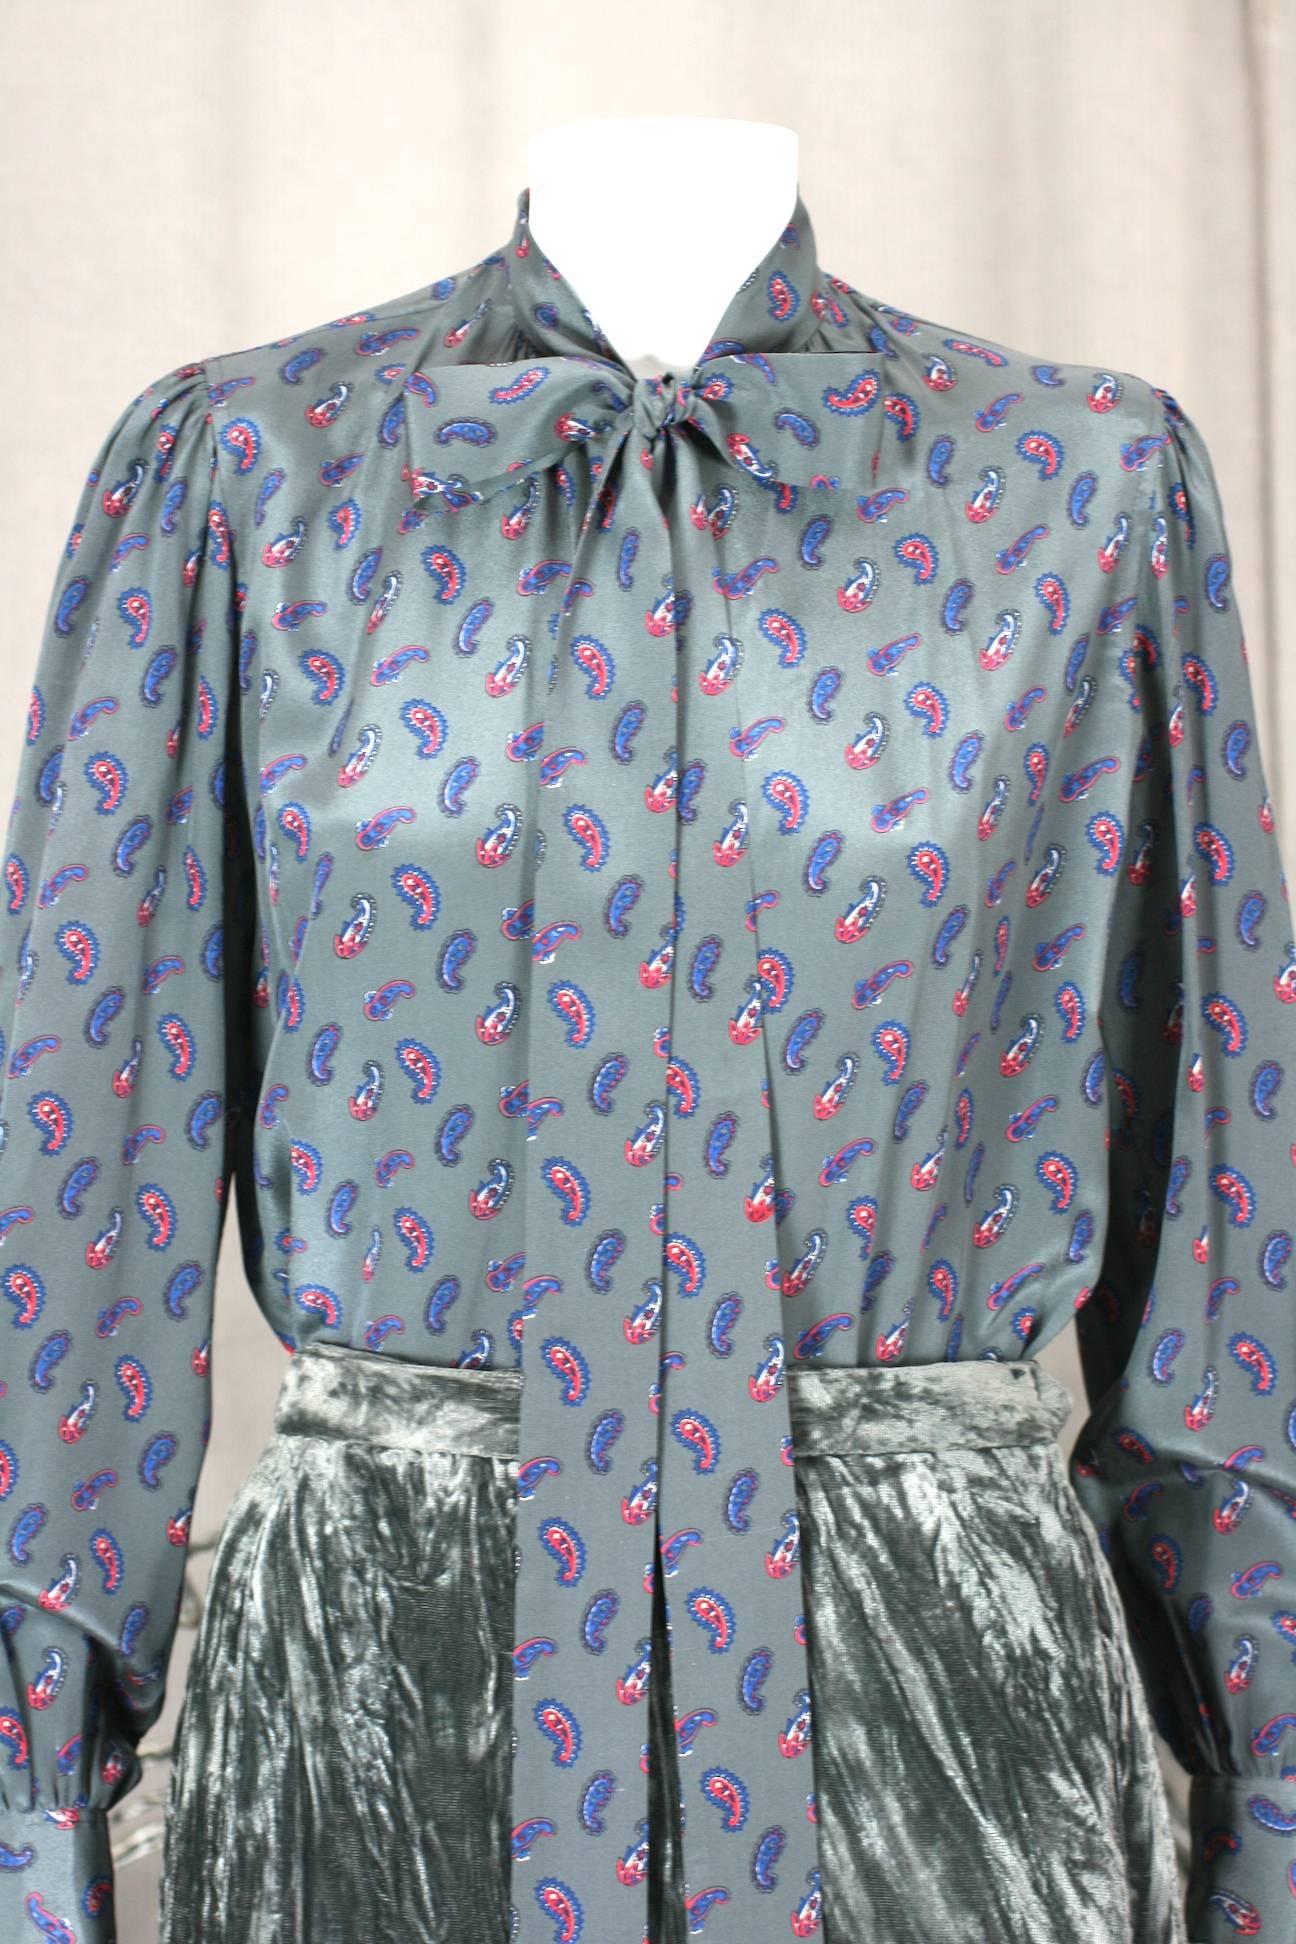 Yves Saint Laurent silk crepe blouse in deep gray with paisley print and super long neck tie.
Vintage size 34. Length 23